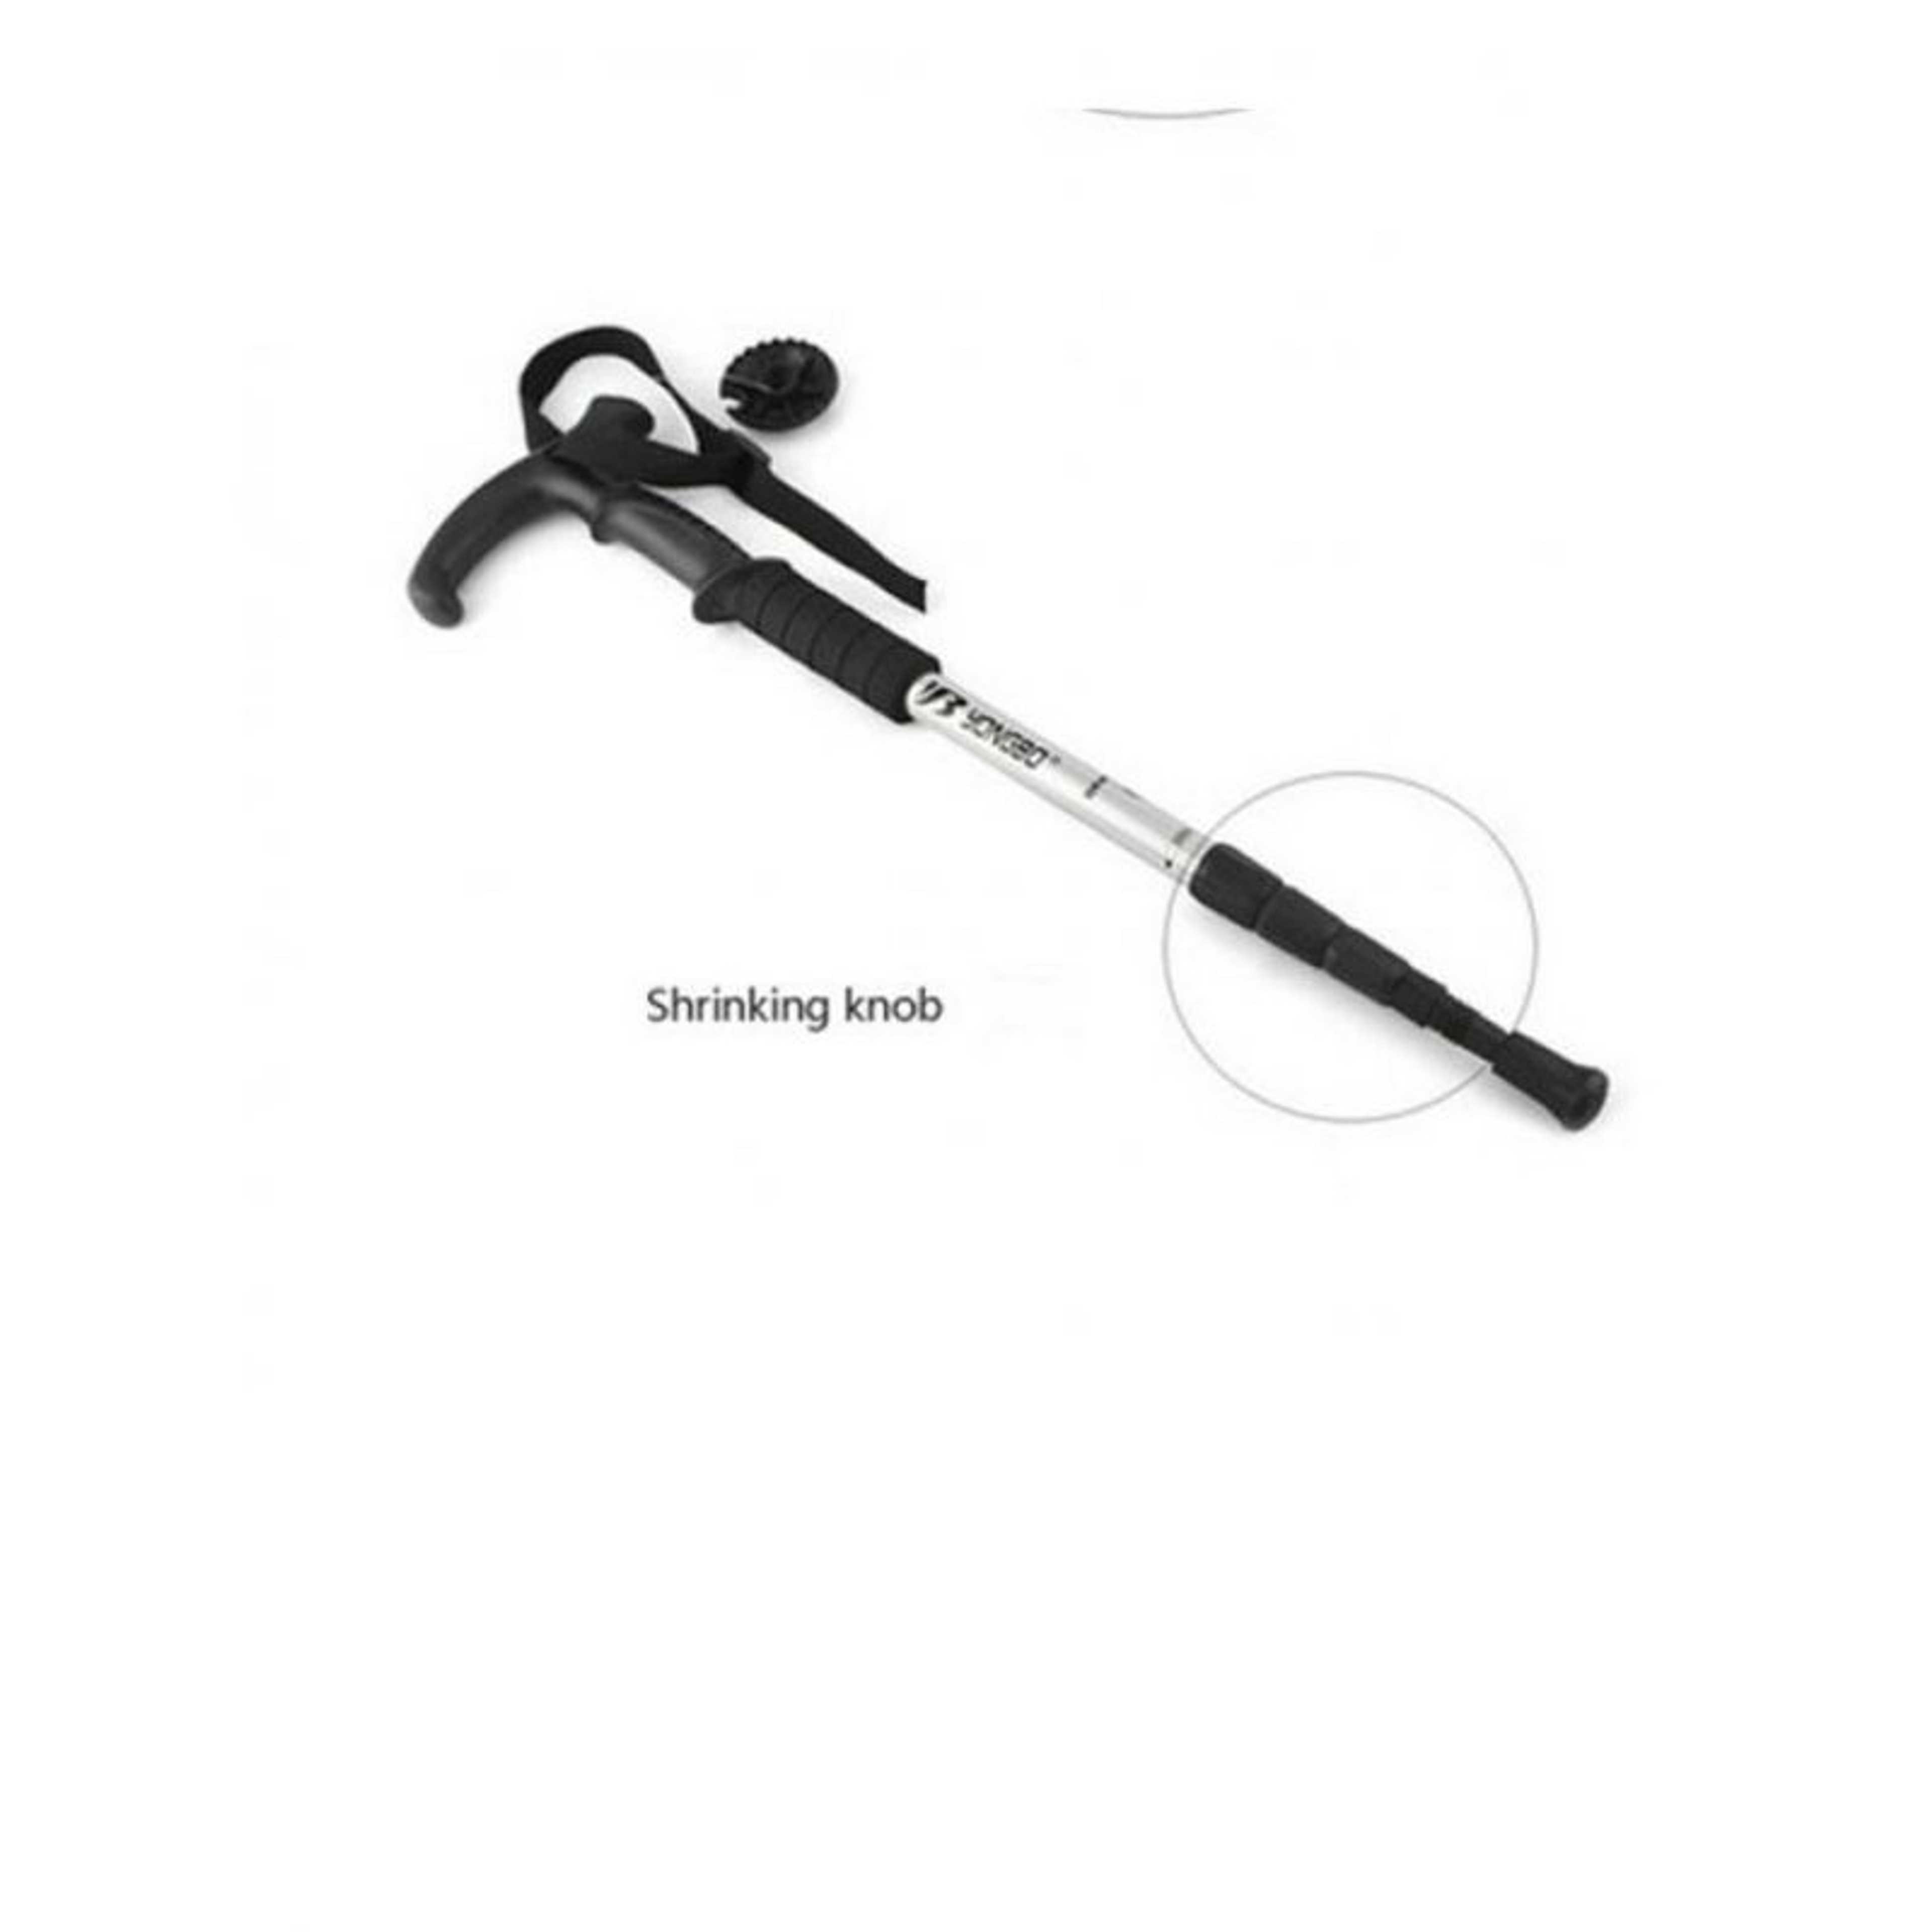 4-Sction Adjustabl Can Walking Stick Trkking Pols Trail Ultralight Adjustabl Cans For Mn Outdoor Camping Hiking Climbing  Whit